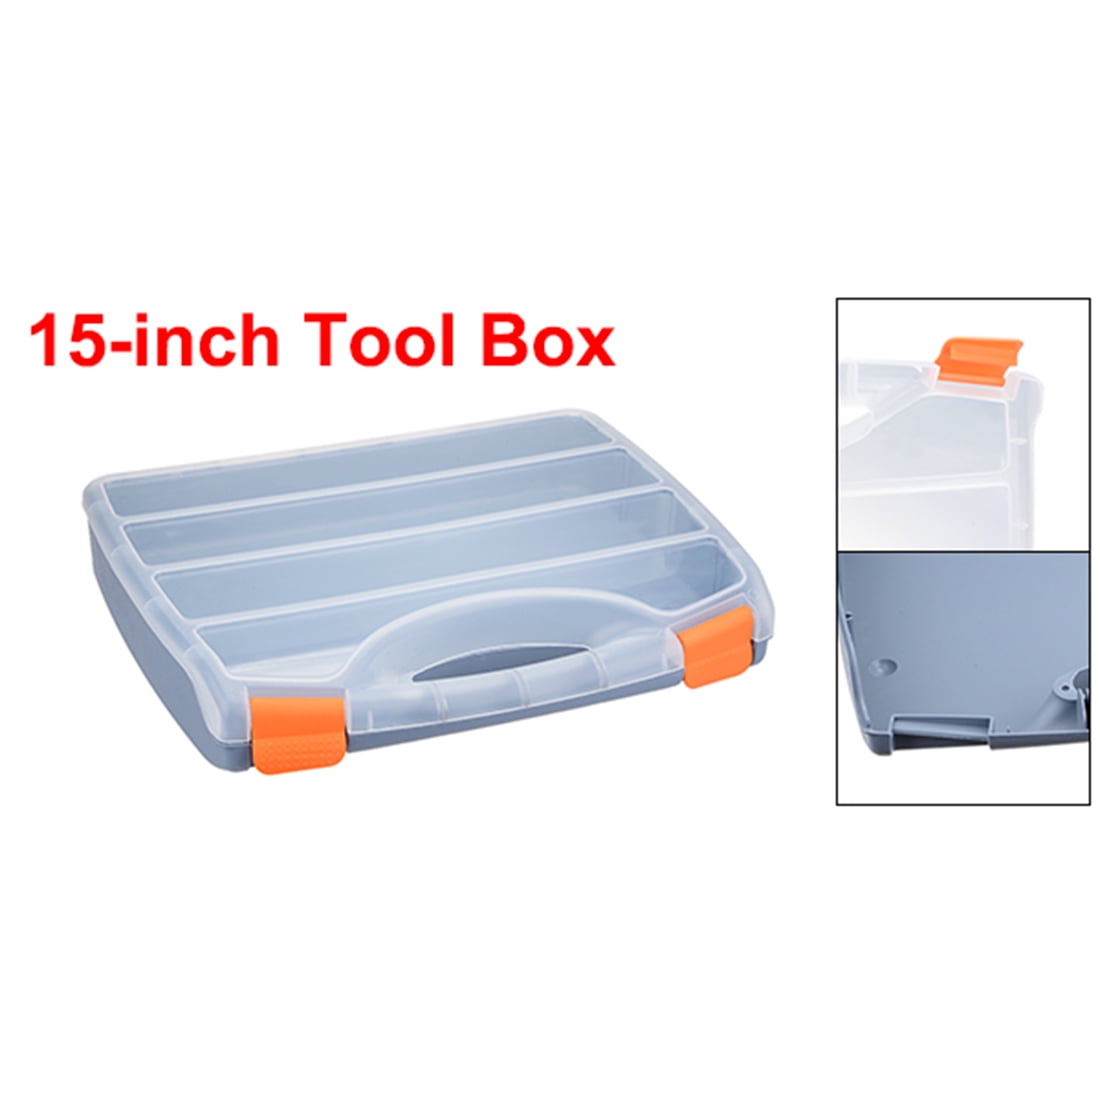 Plastic Tool Box with Tray and Organizers Includes Removable 4 Small Parts Boxes uxcell 15-inch Tool Box 